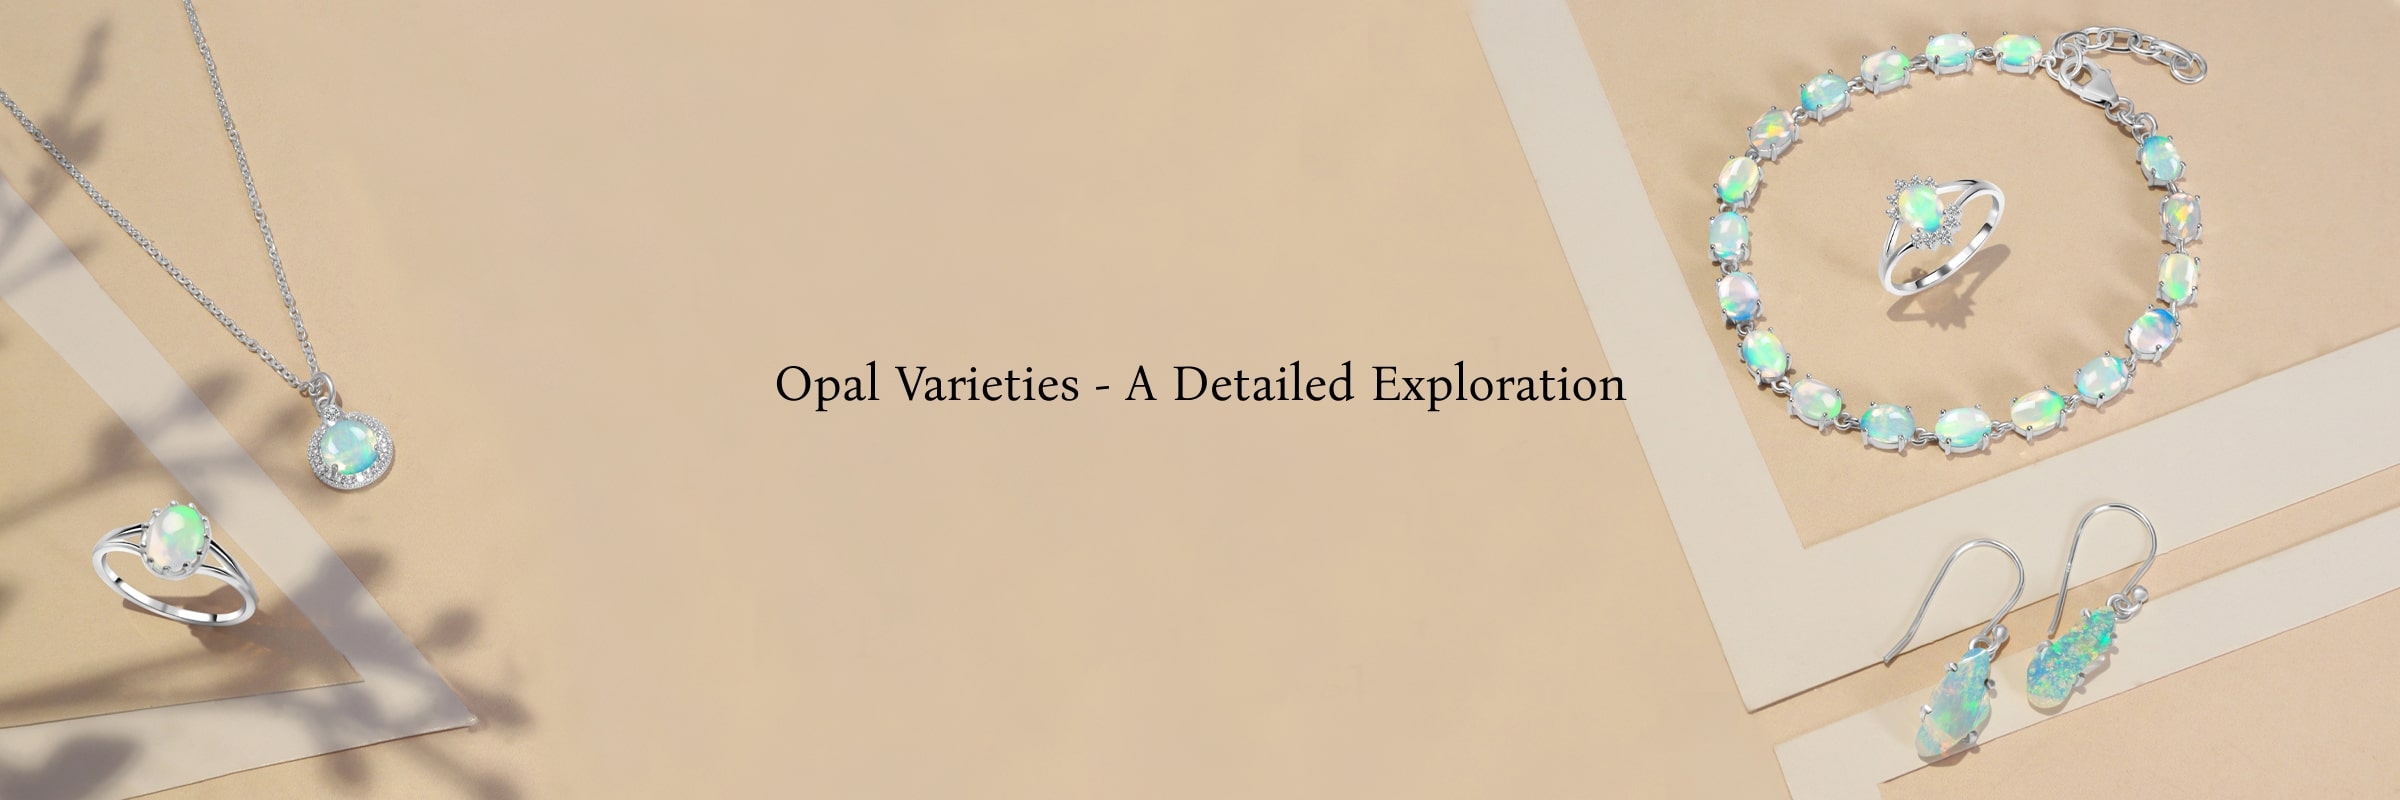 What Types Of Opal Are There? A Comprehensive List of Opal Types